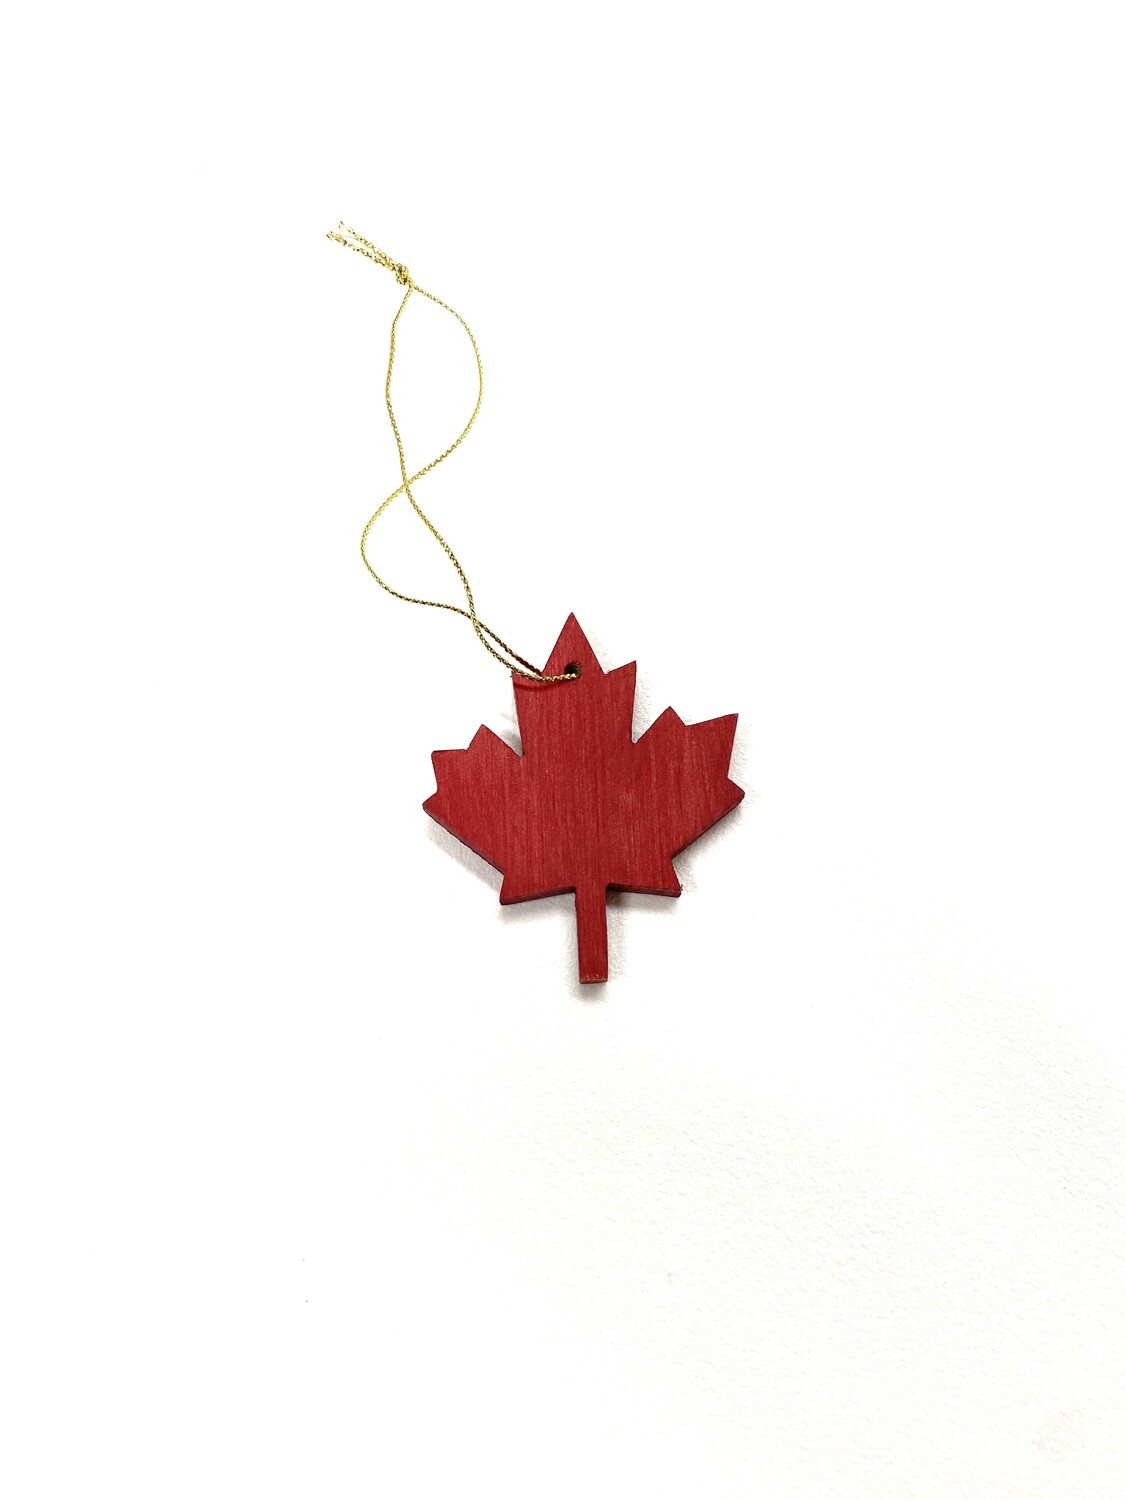 Maple Leaf Ornament- Jerry Walsh